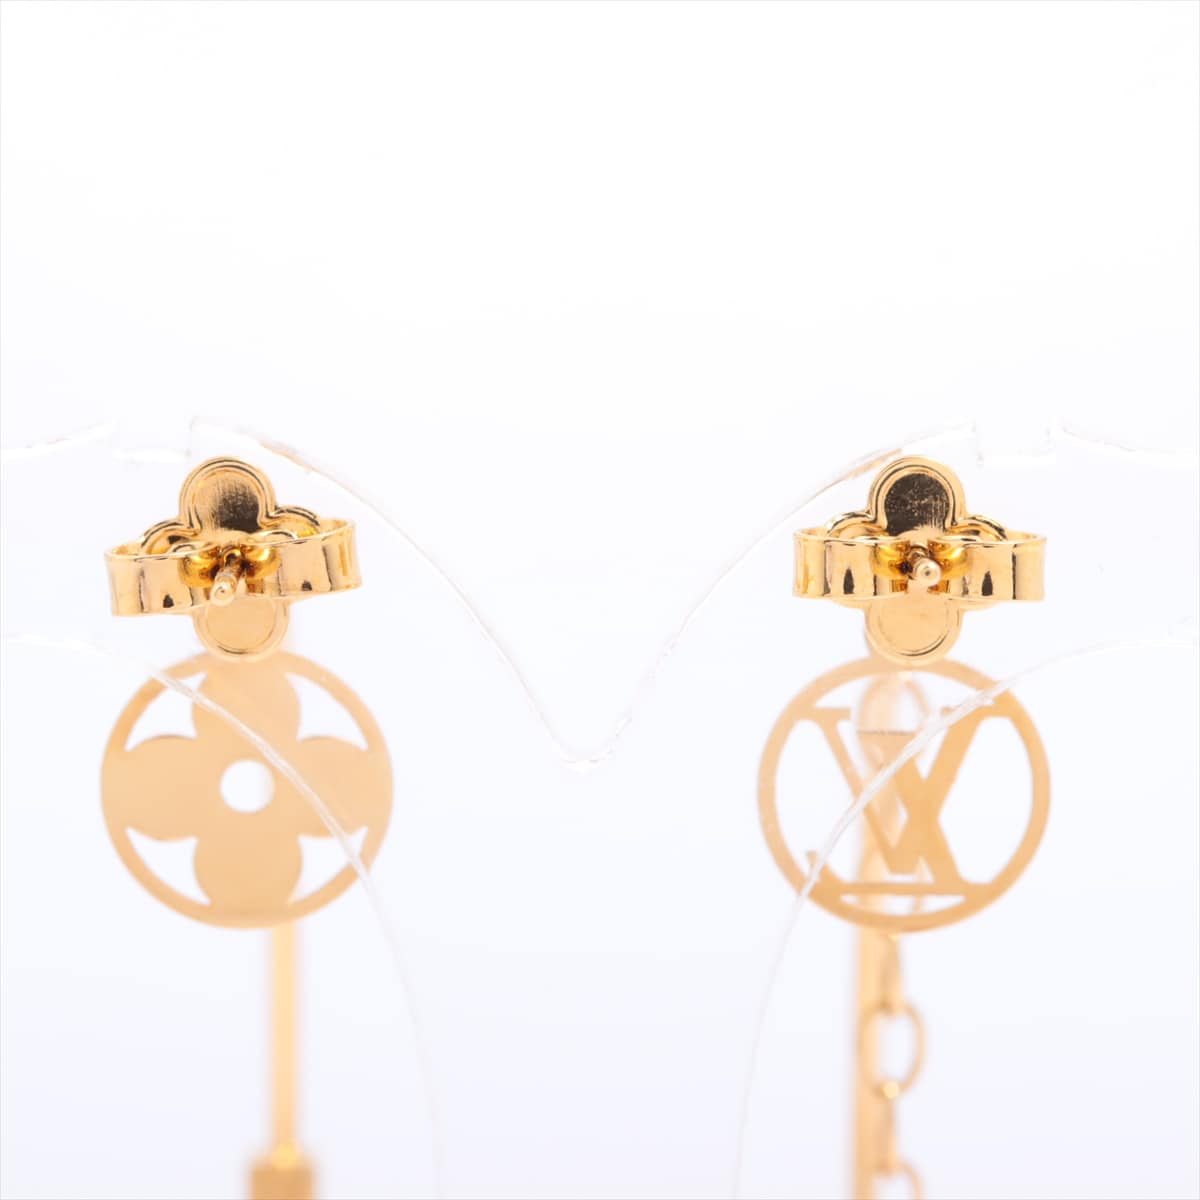 Louis Vuitton M80275 Roman HOLIDAY Chain Hoop OB1200 Piercing jewelry (for both ears) GP×inestone Gold